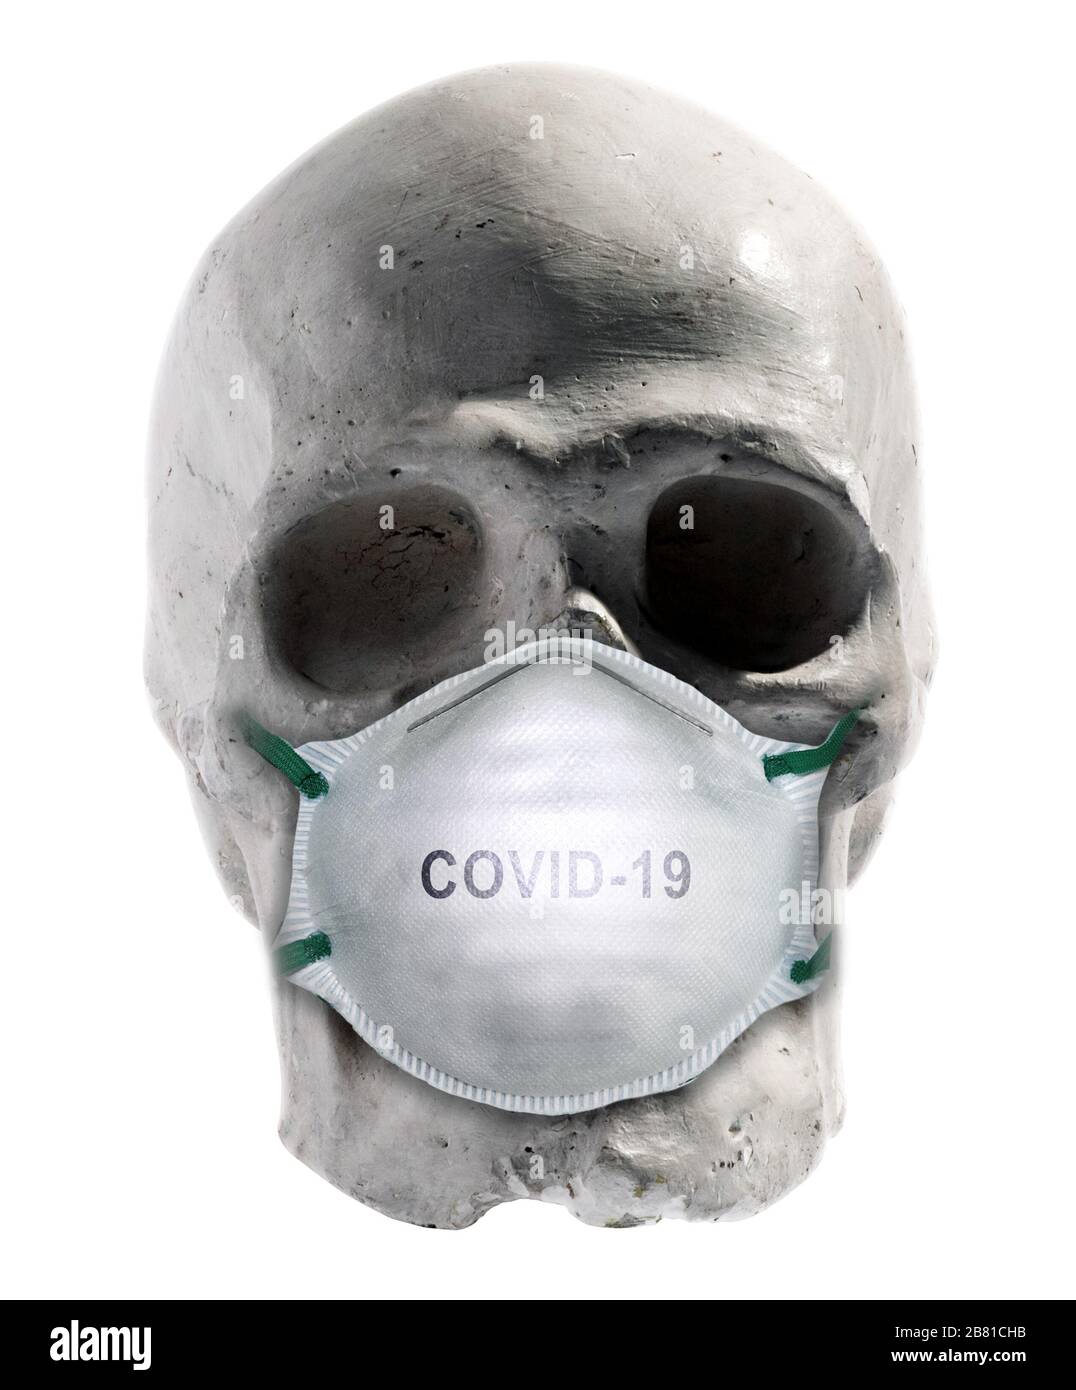 Human skull wearing a Covid-19 surgical face mask in a dire warning that the viral disease can be fatal to people isolated on white Stock Photo